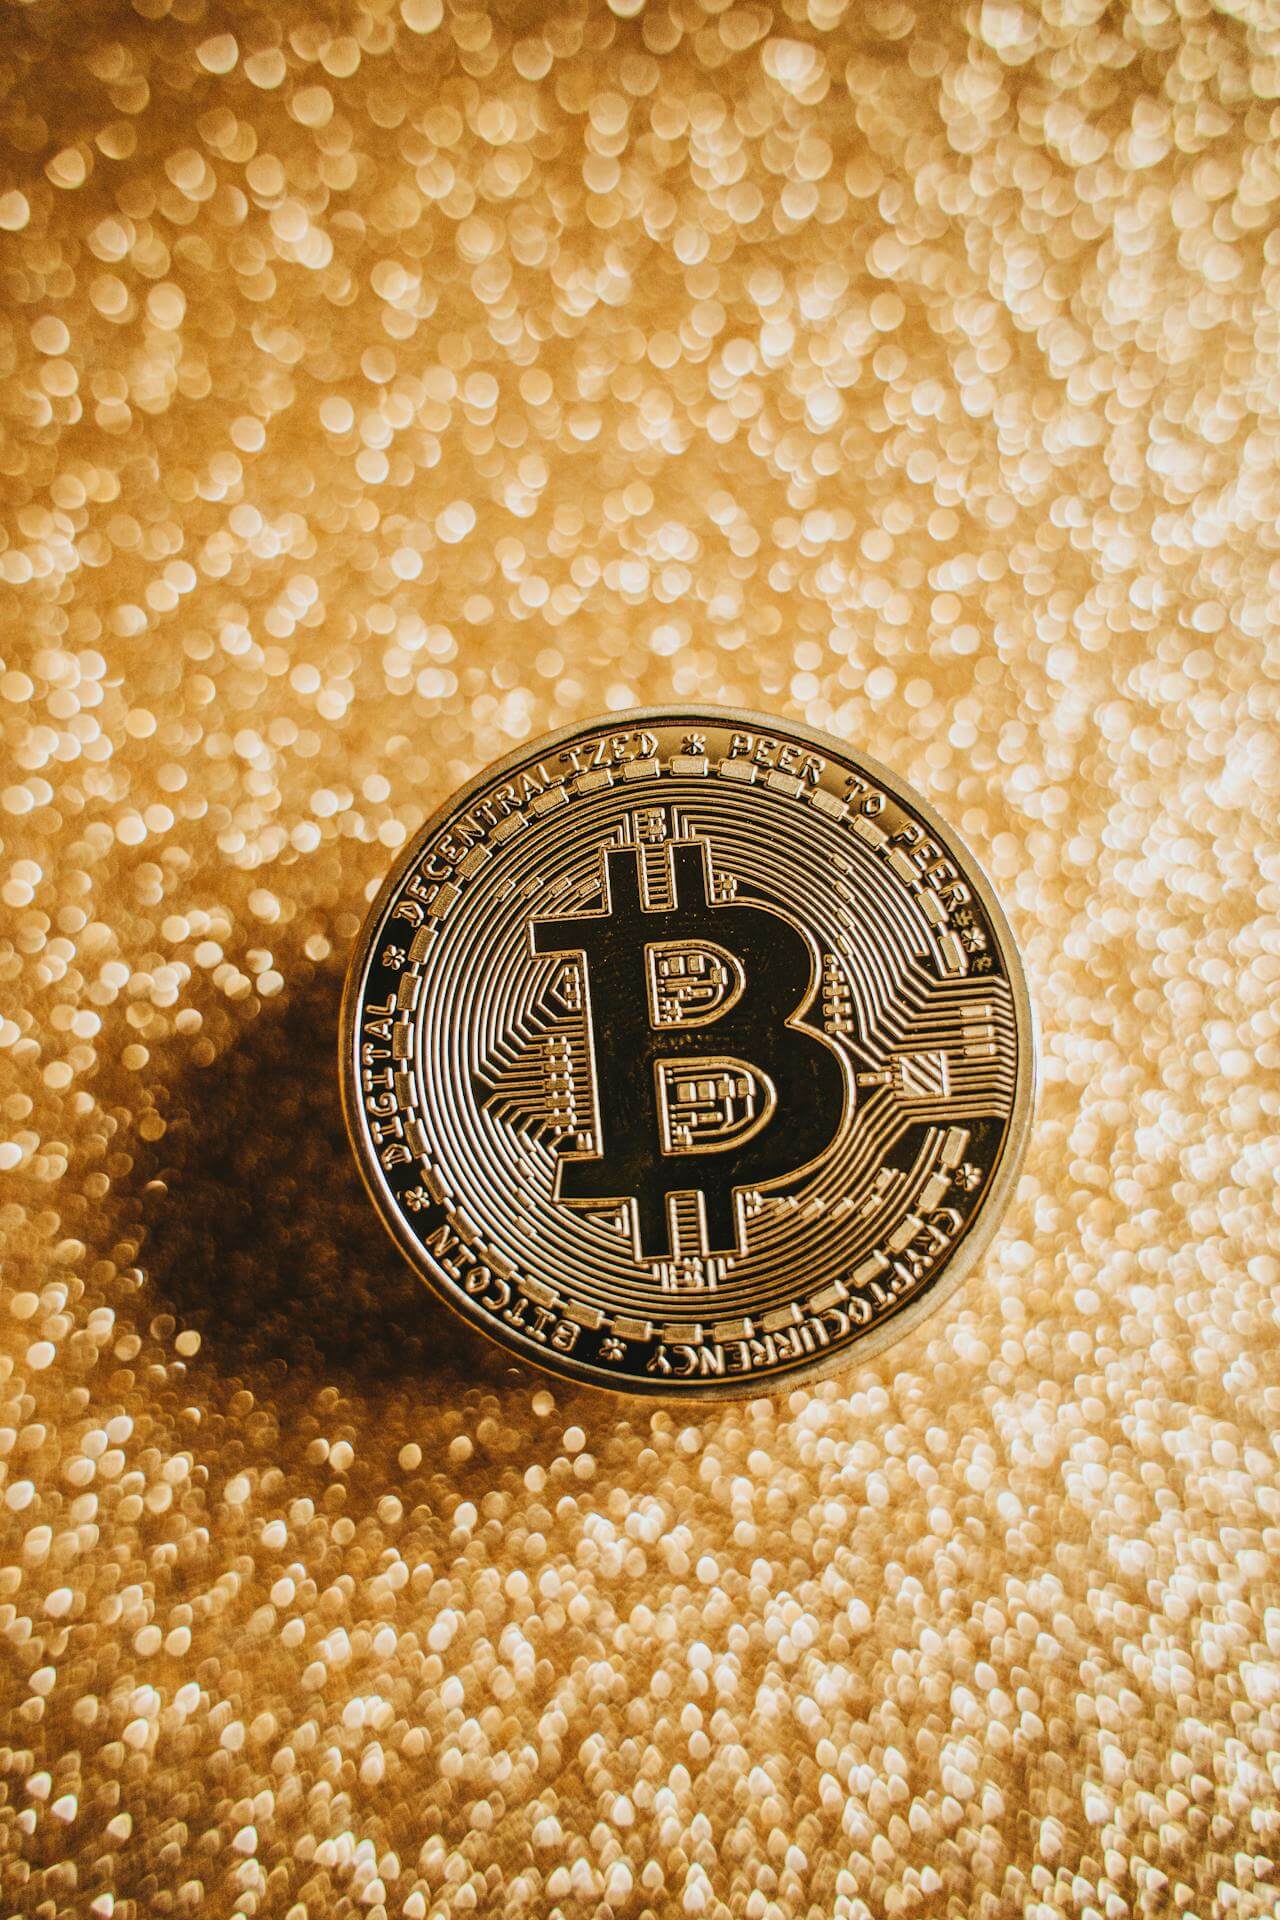 New to Bitcoin? A Beginner's Guide